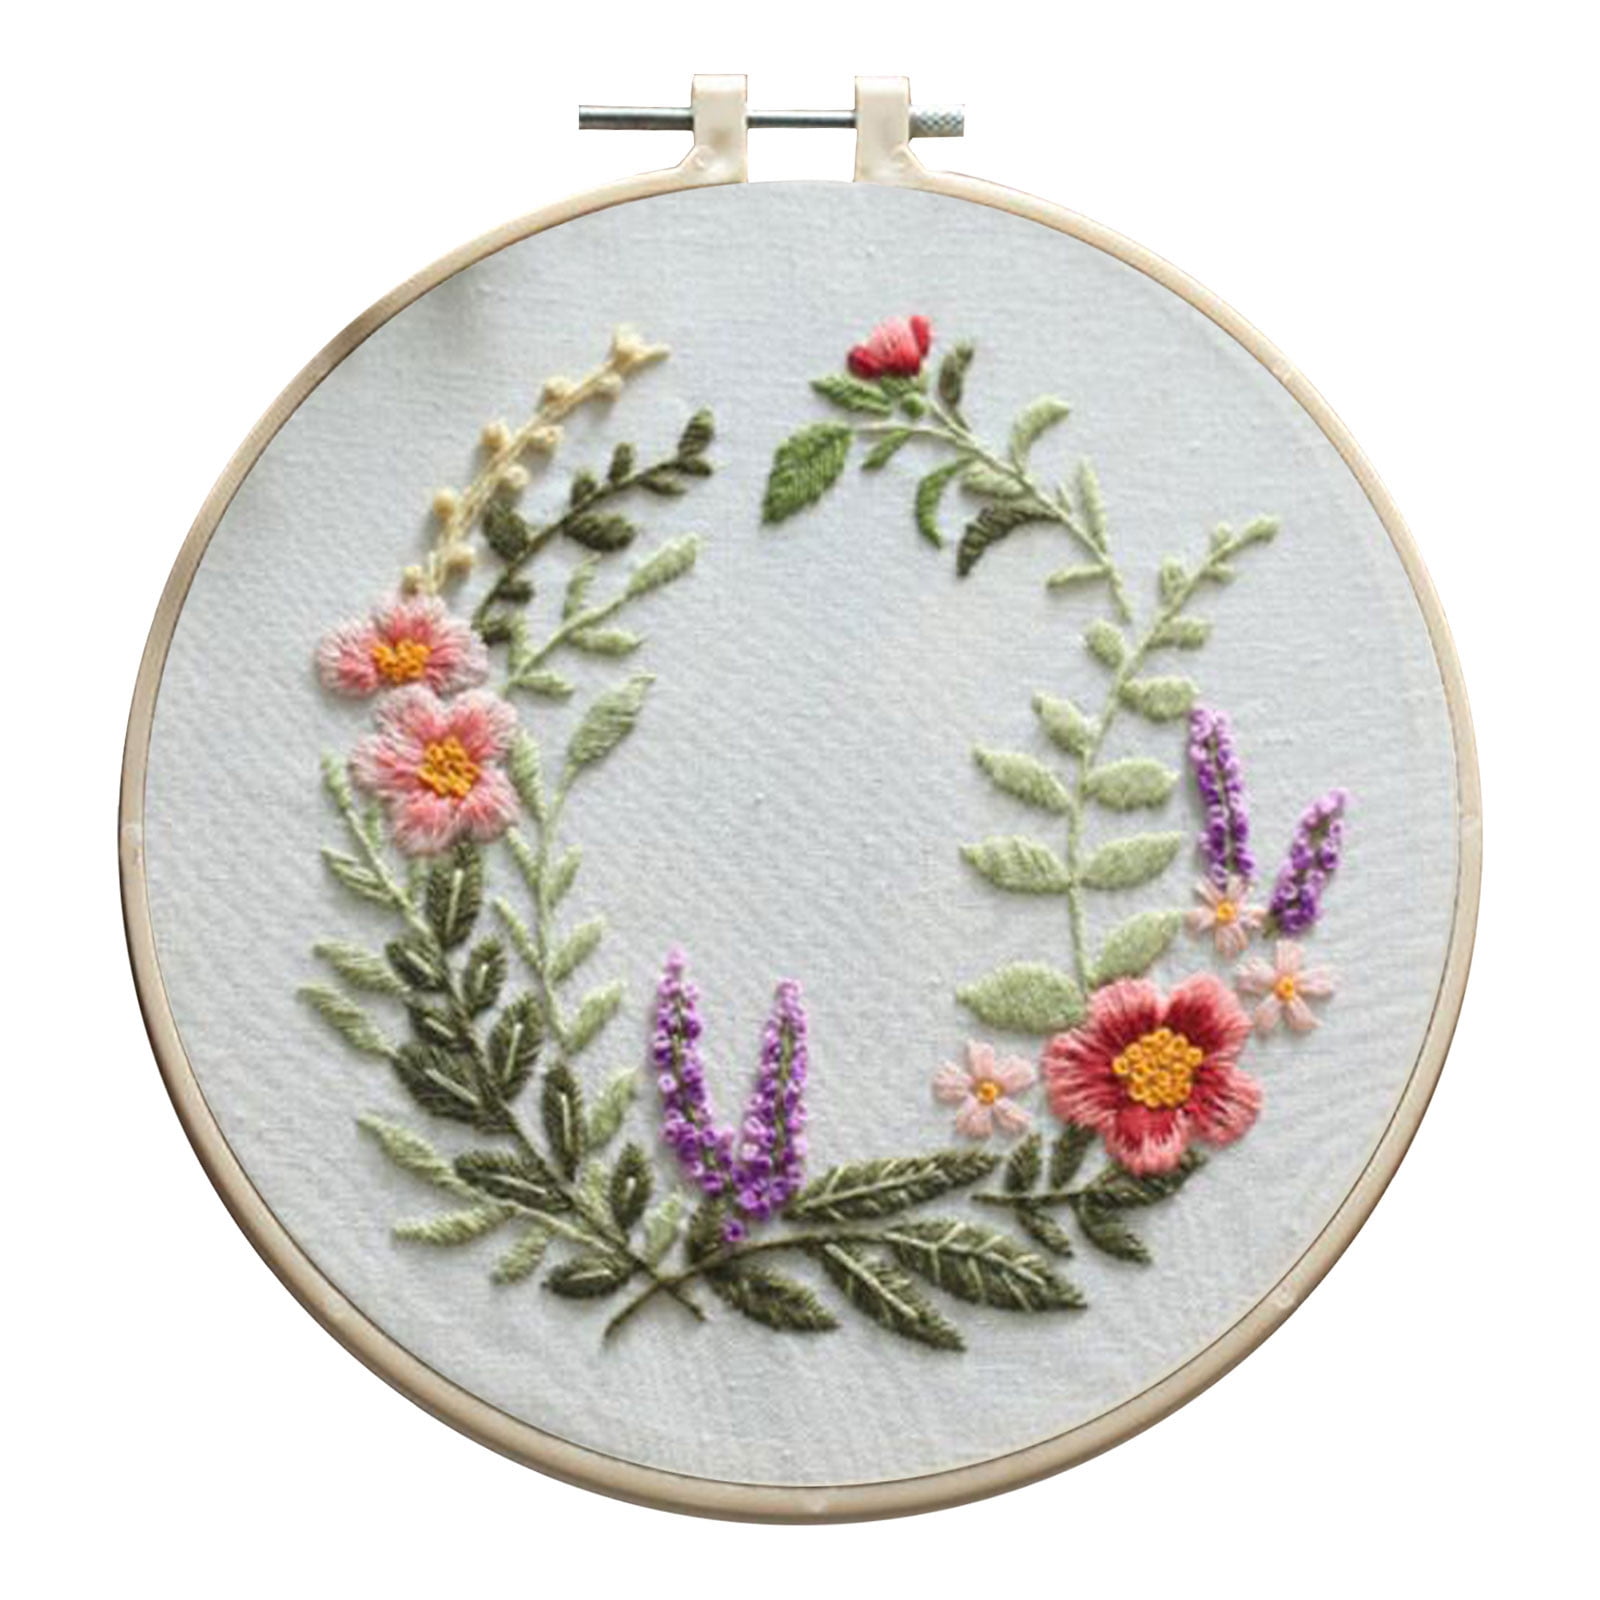 TUTUnaumb Hot Sale Cross Stitch Tools And Beginner Embroidery Kits